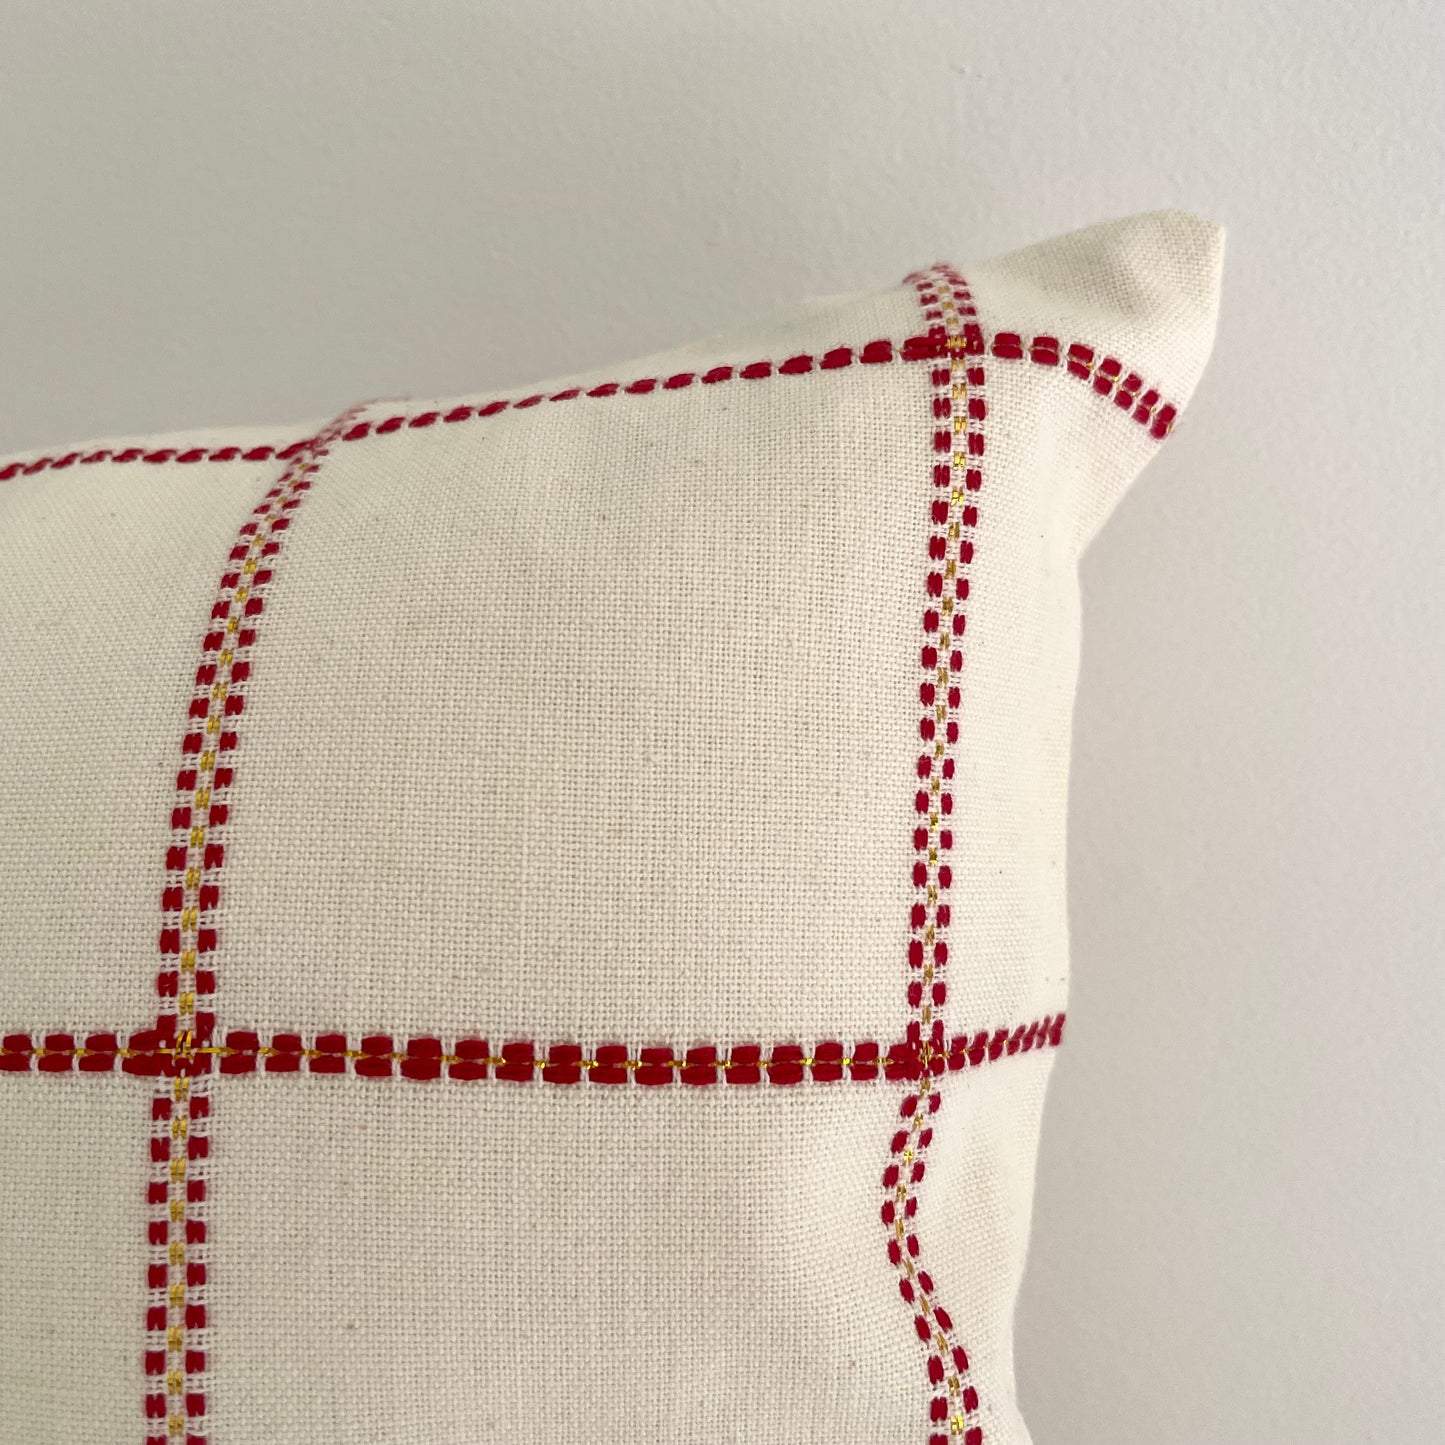 red and cream woven grid 18 inch square pillow cover with gold thread for Christmas decor